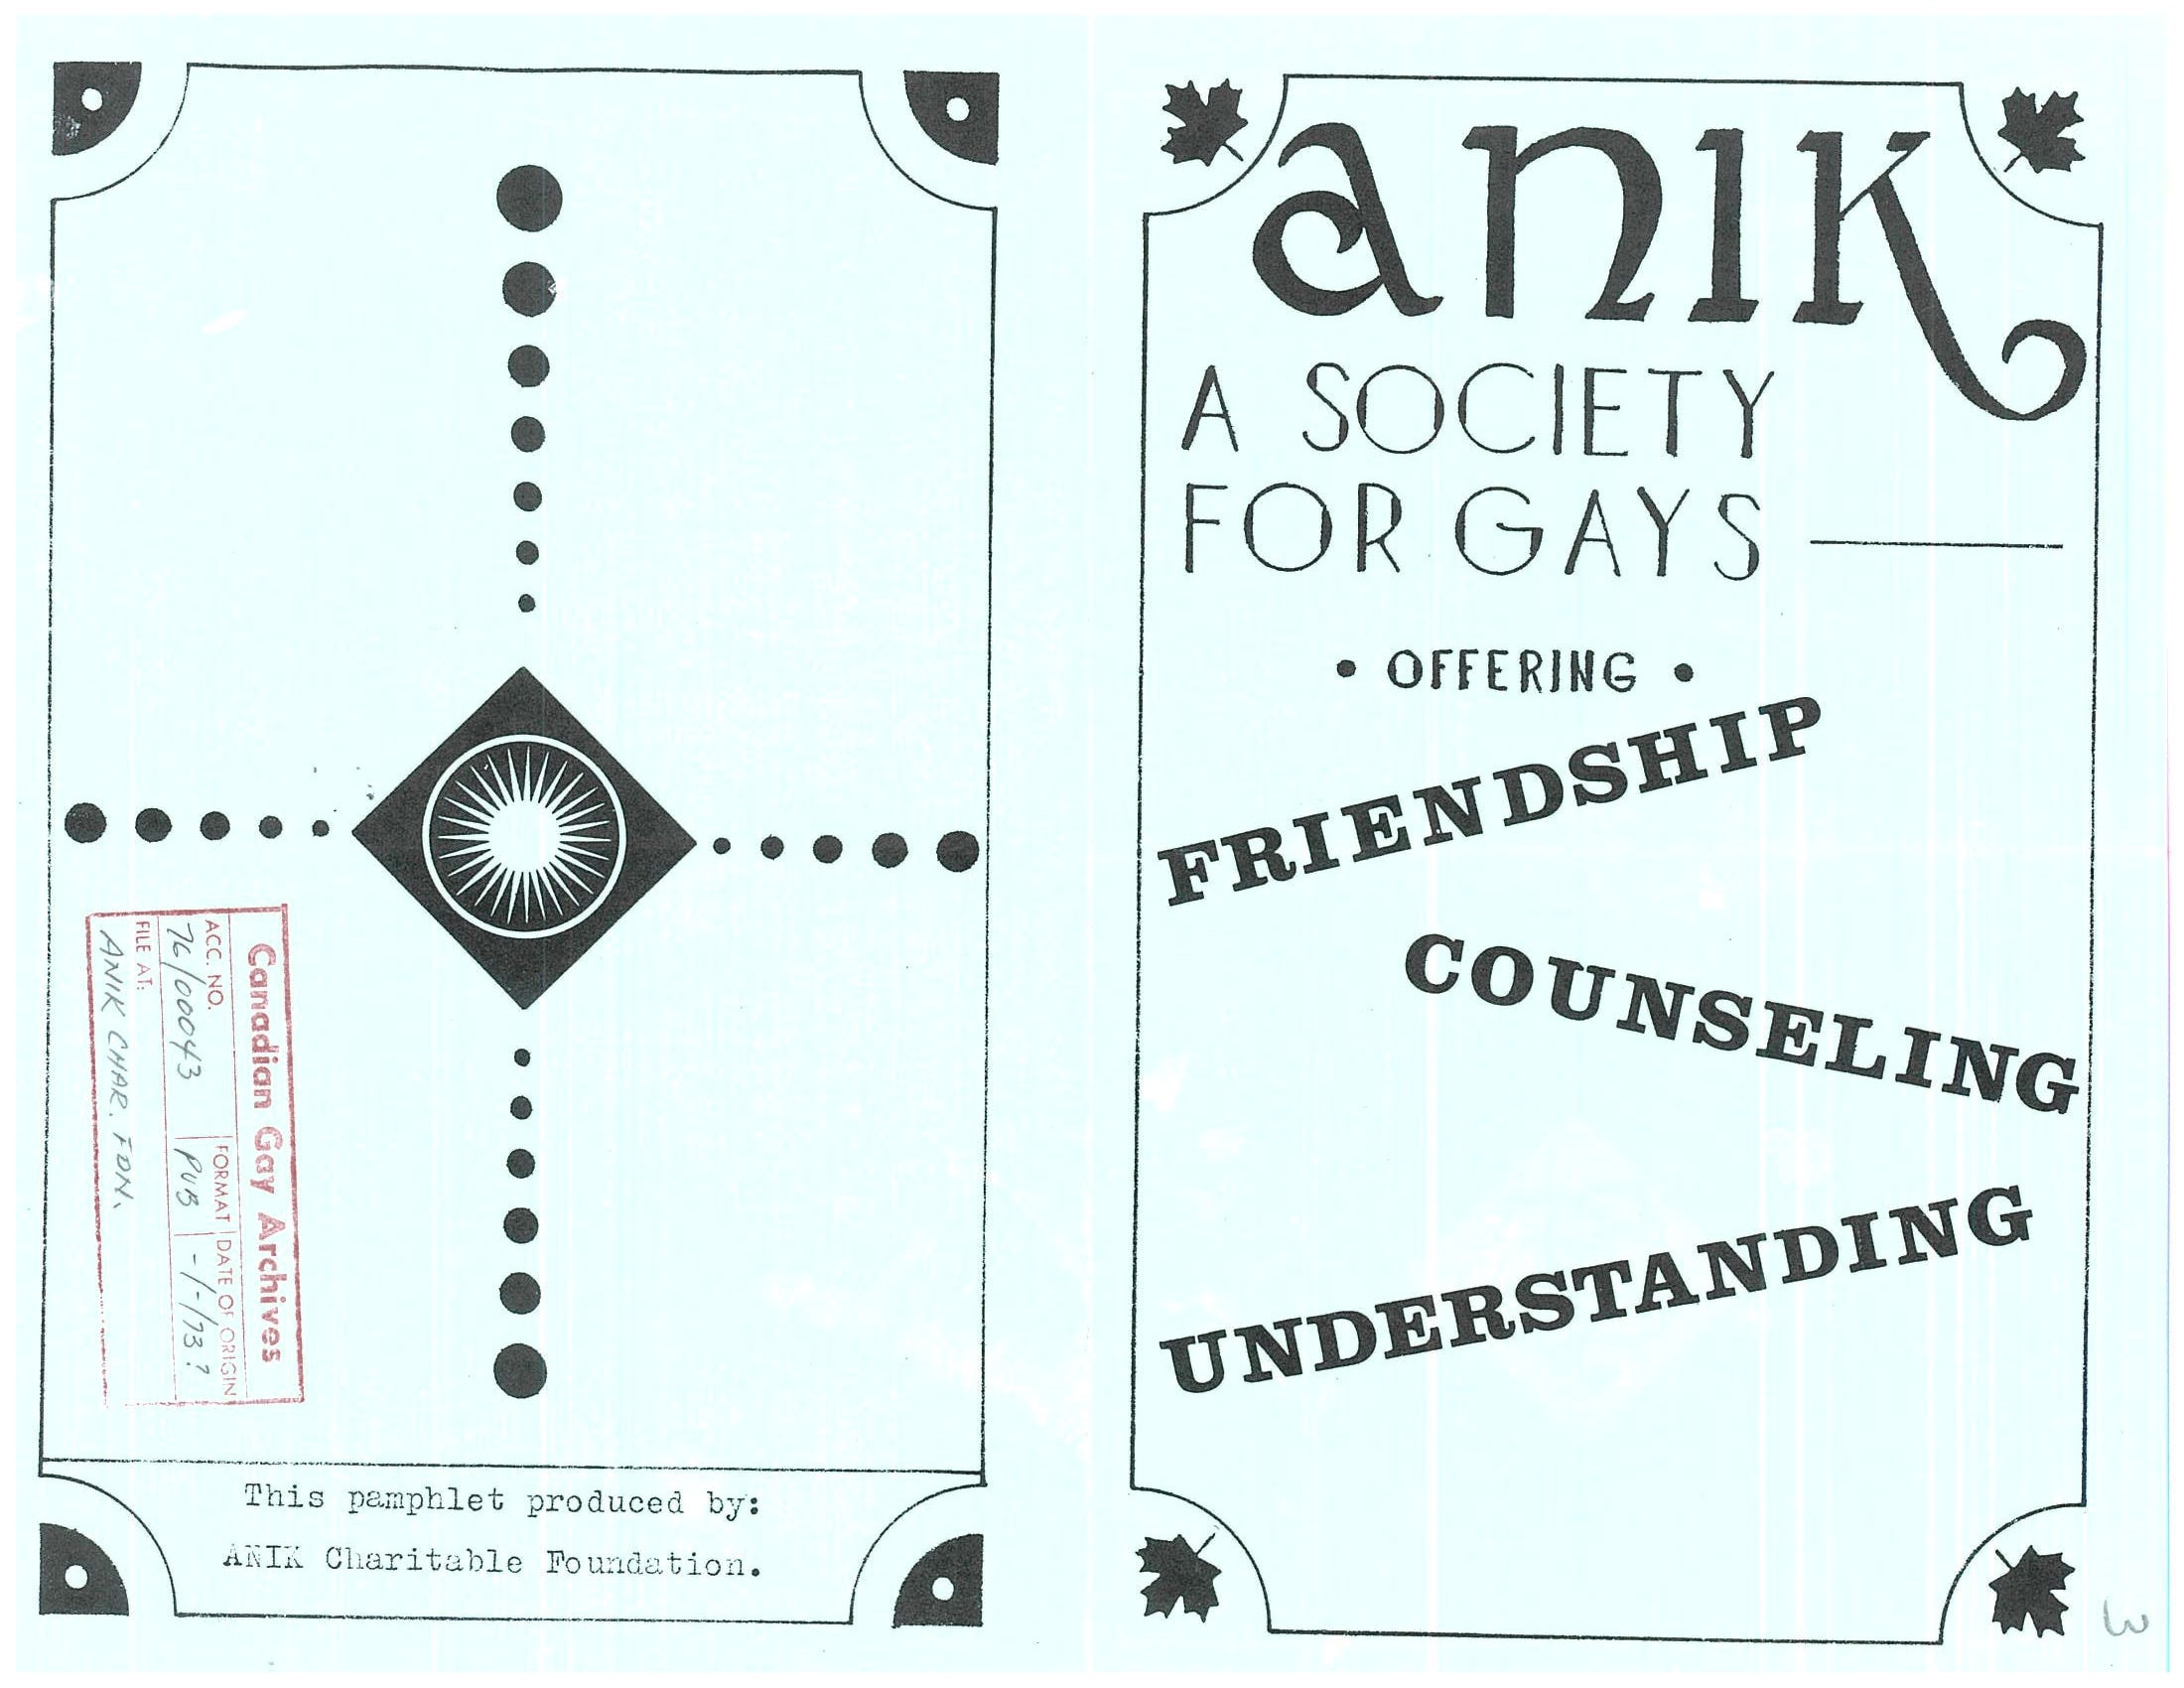 Blue two-sided pamphlet with group name and the words “Friendship,” “Counselling,” and “Understanding”